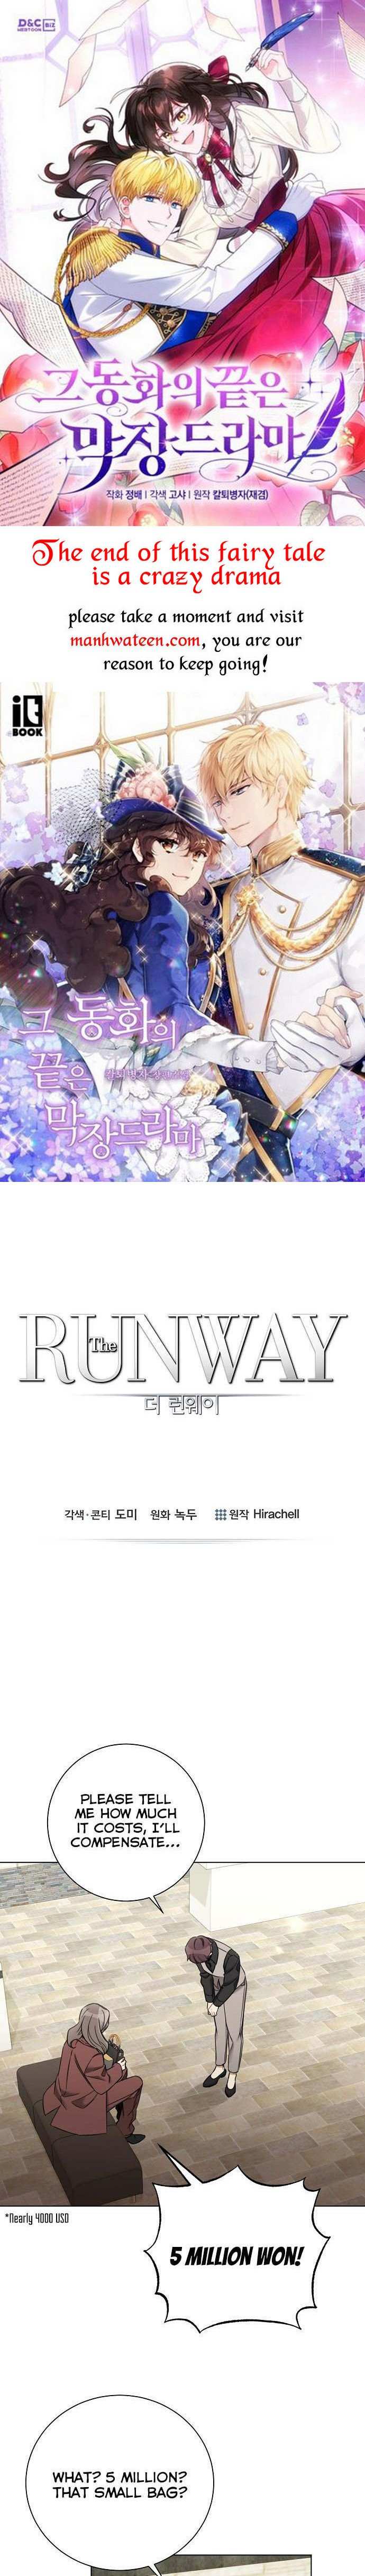 THE Runway Chapter 77